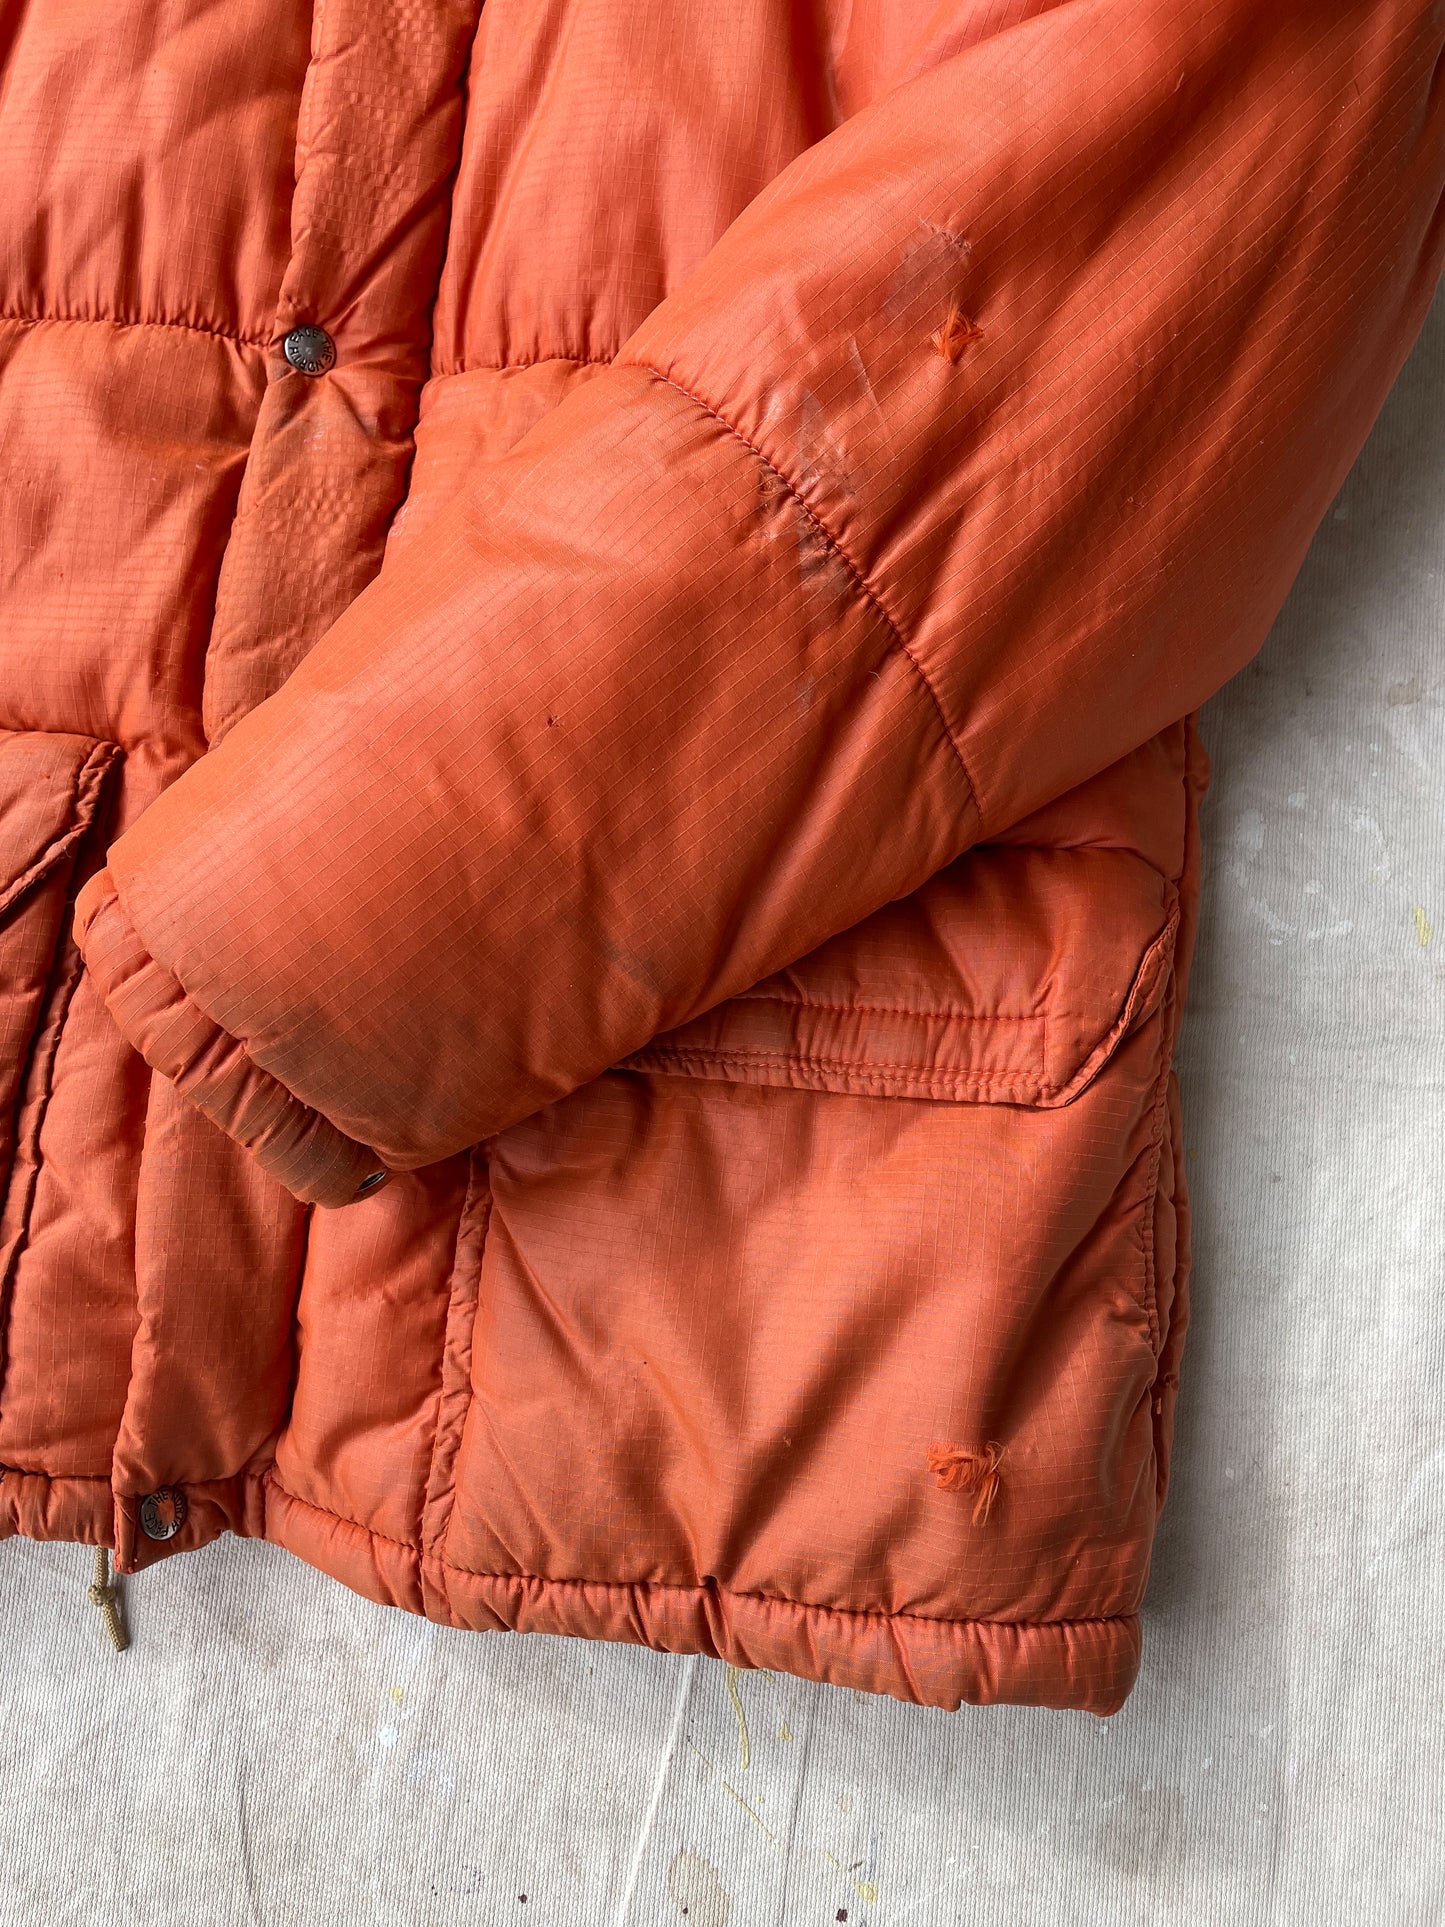 70's The North Face Puffer Jacket—[L]